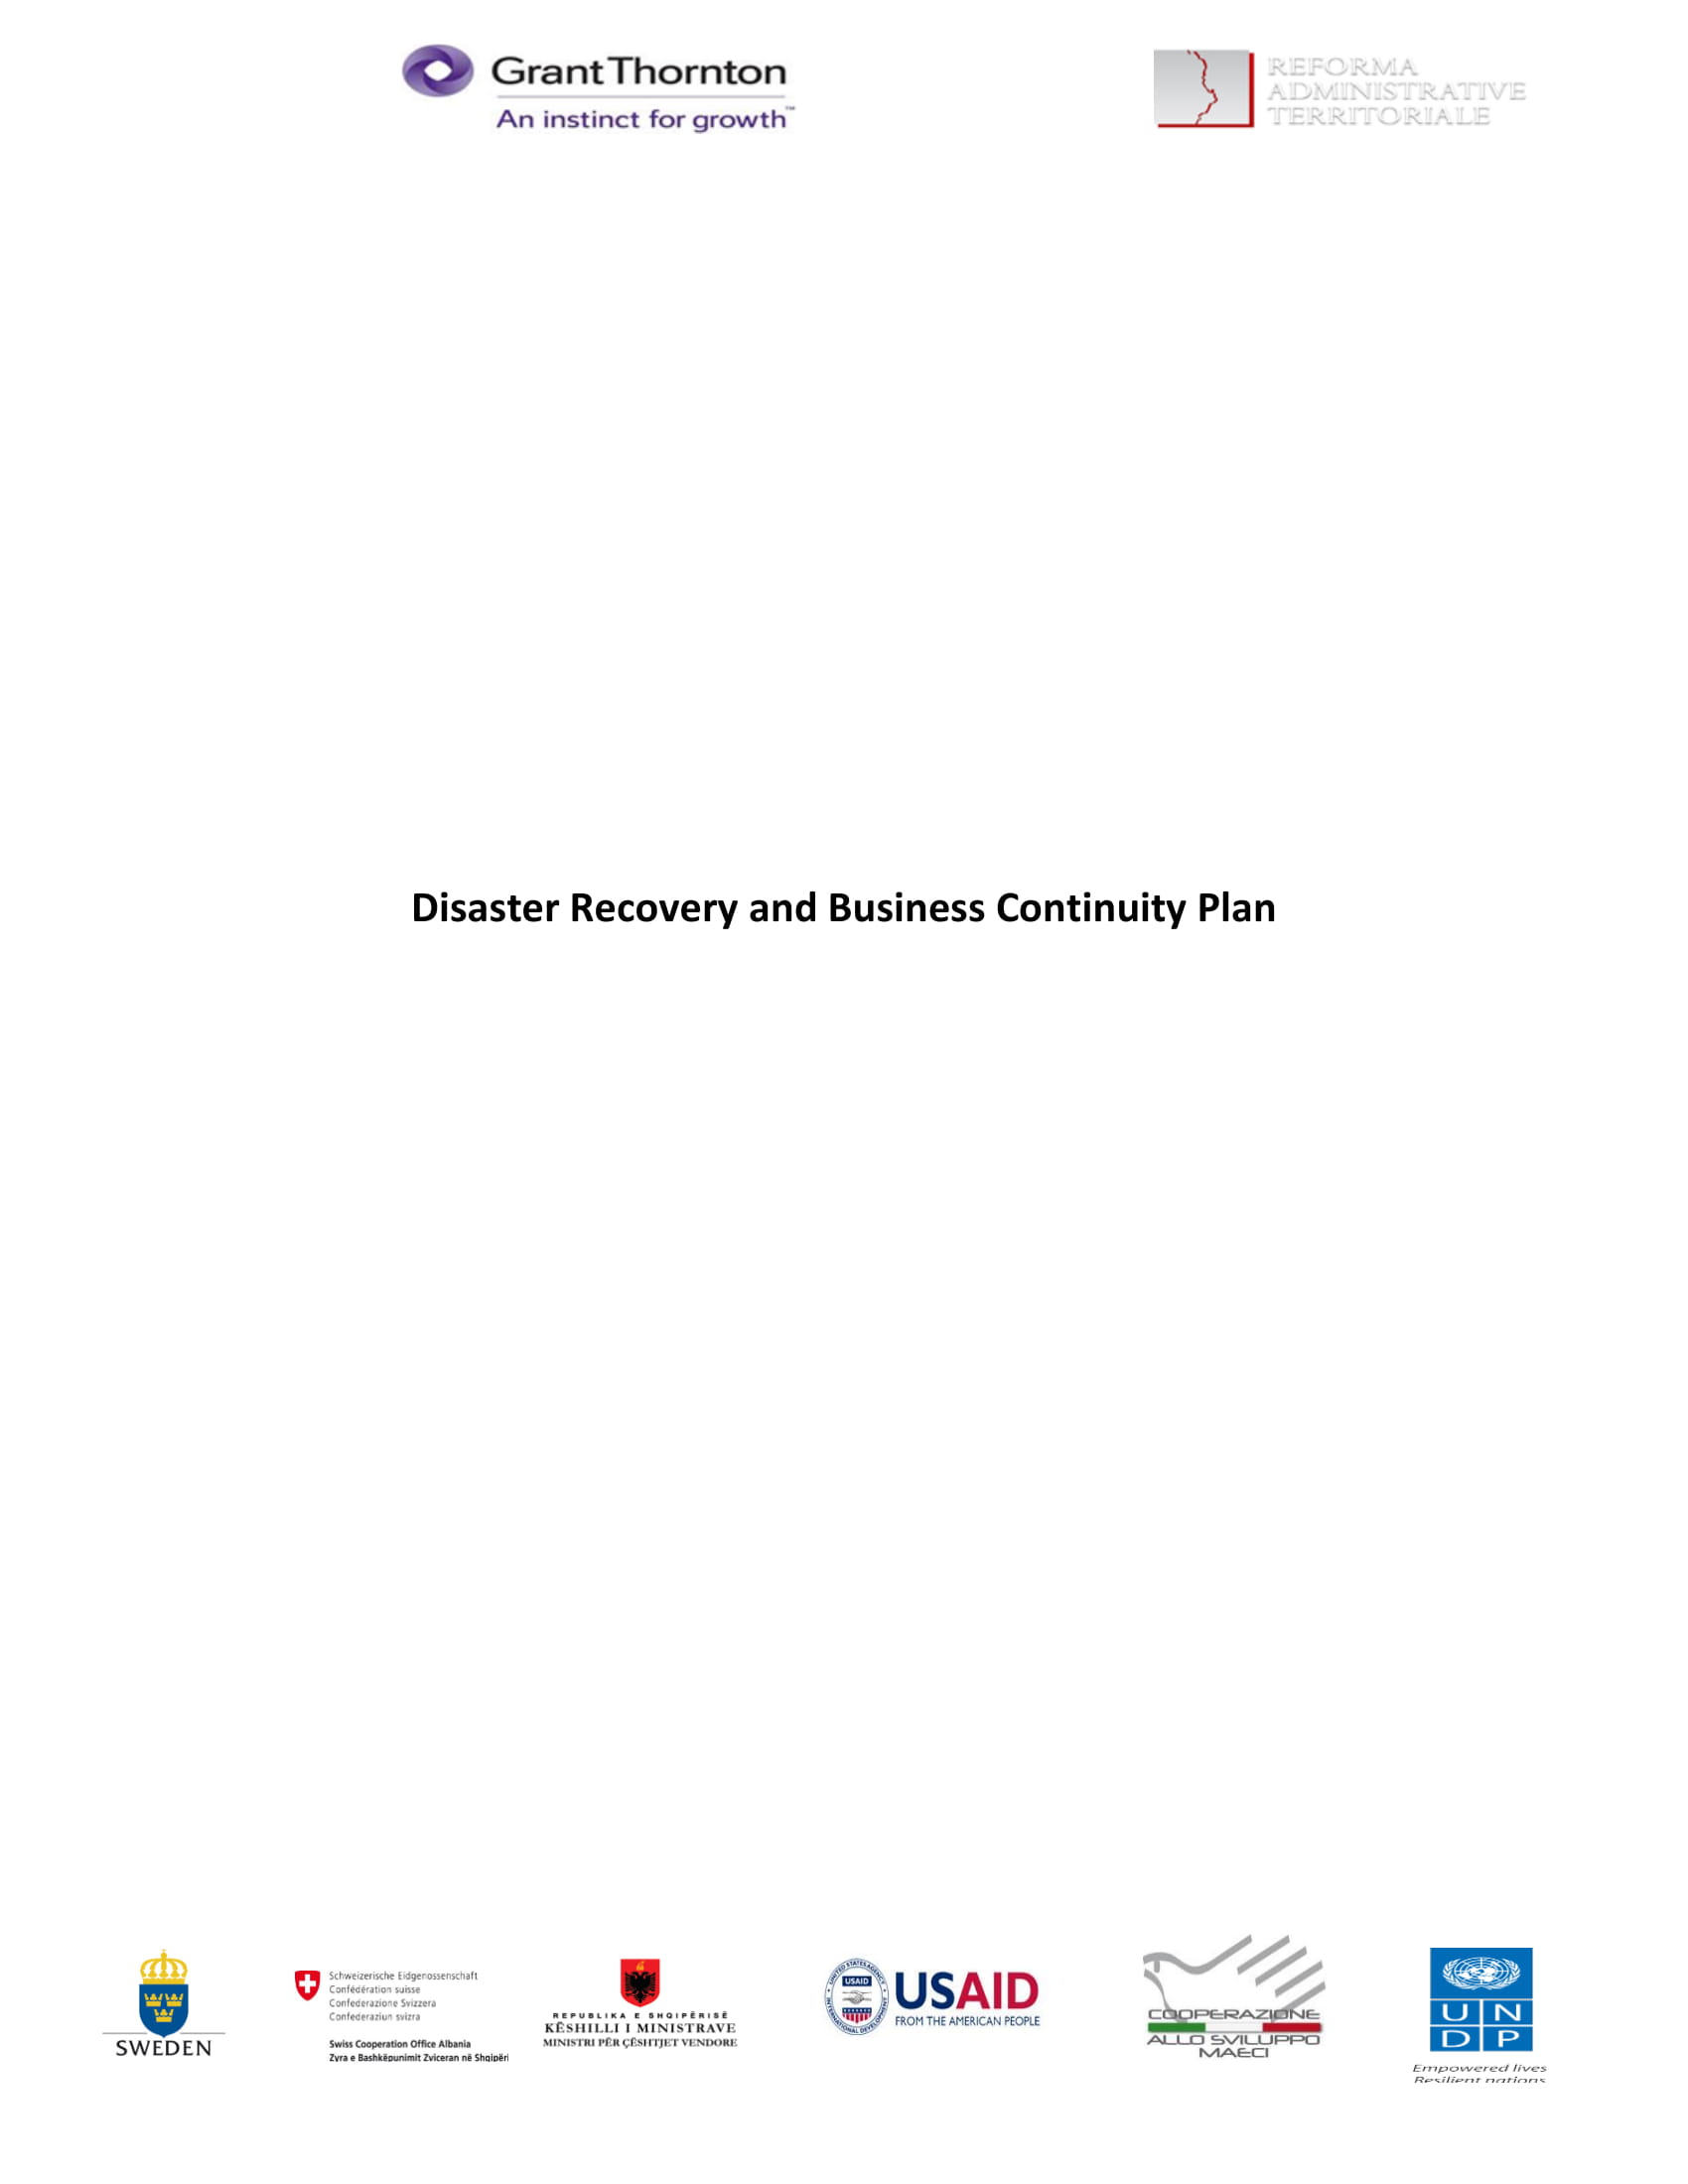 Disaster Recovery and Business Continuity Planning Example 12